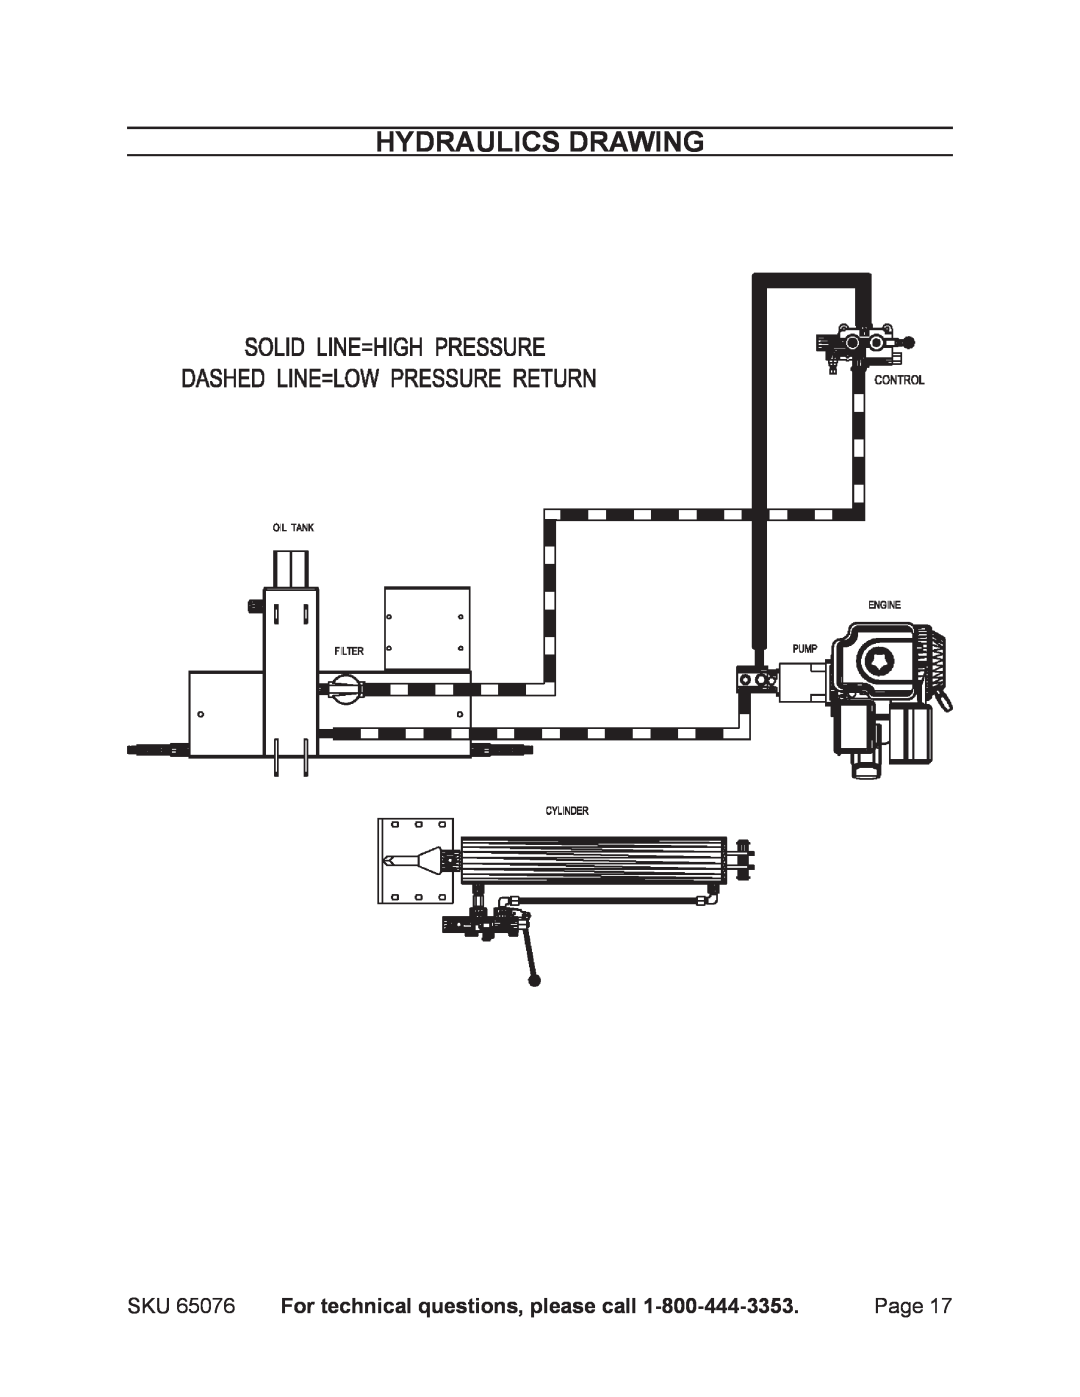 Harbor Freight Tools 65076 manual Hydraulics Drawing, For technical questions, please call 